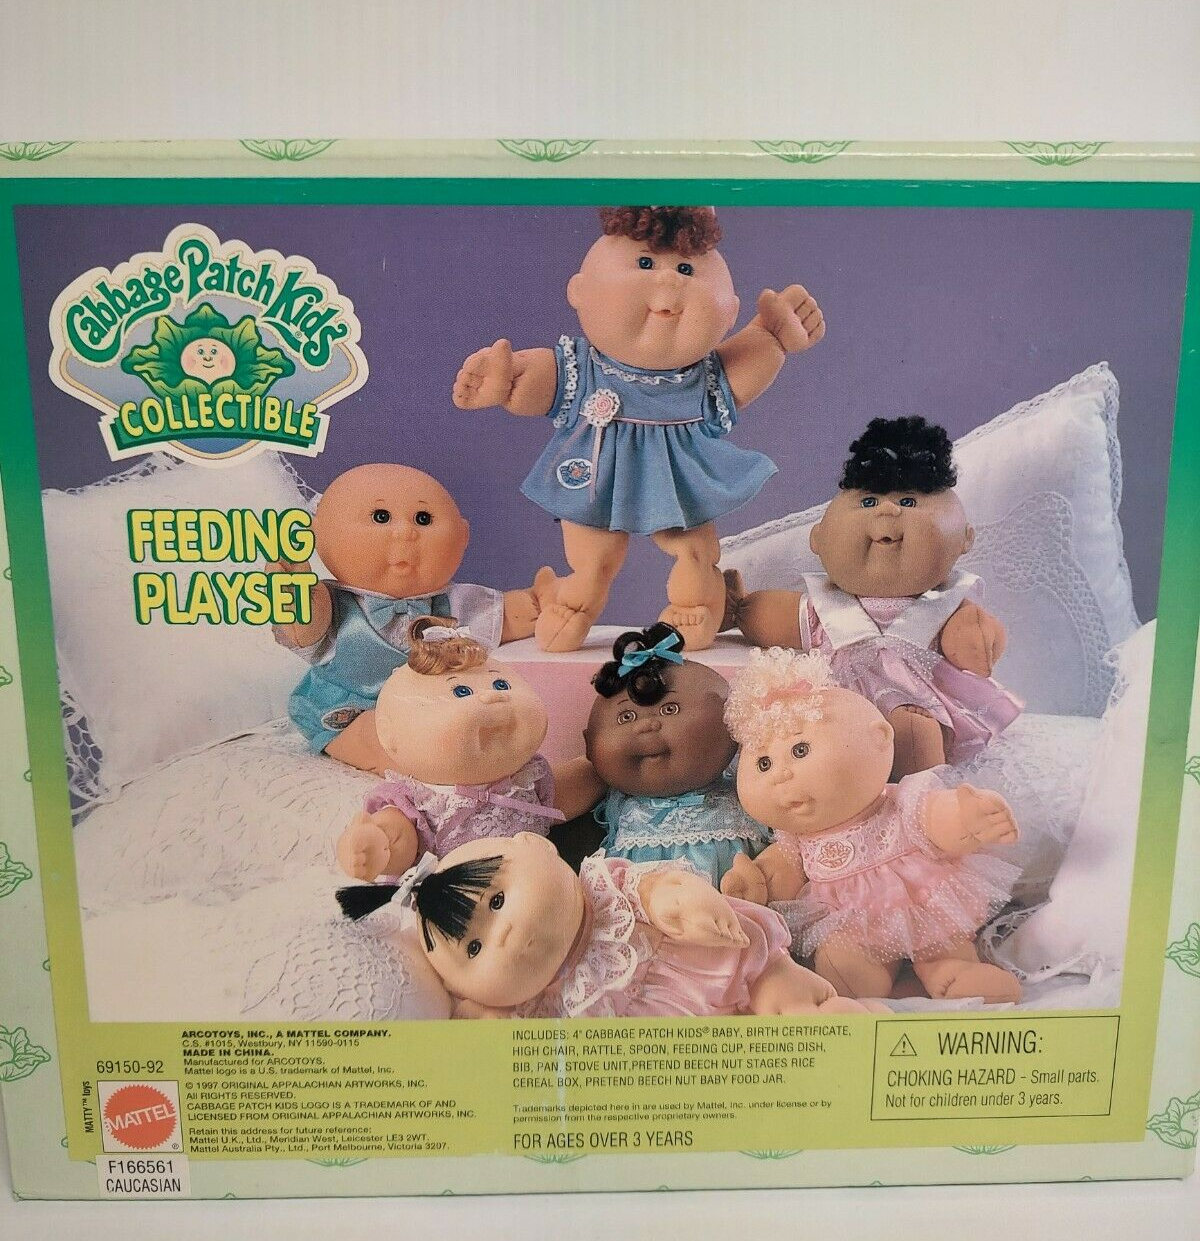 Vintage 1997 Cabbage Patch Kids Collectible Caucasian Feeding Playset NEW Sealed - $39.55